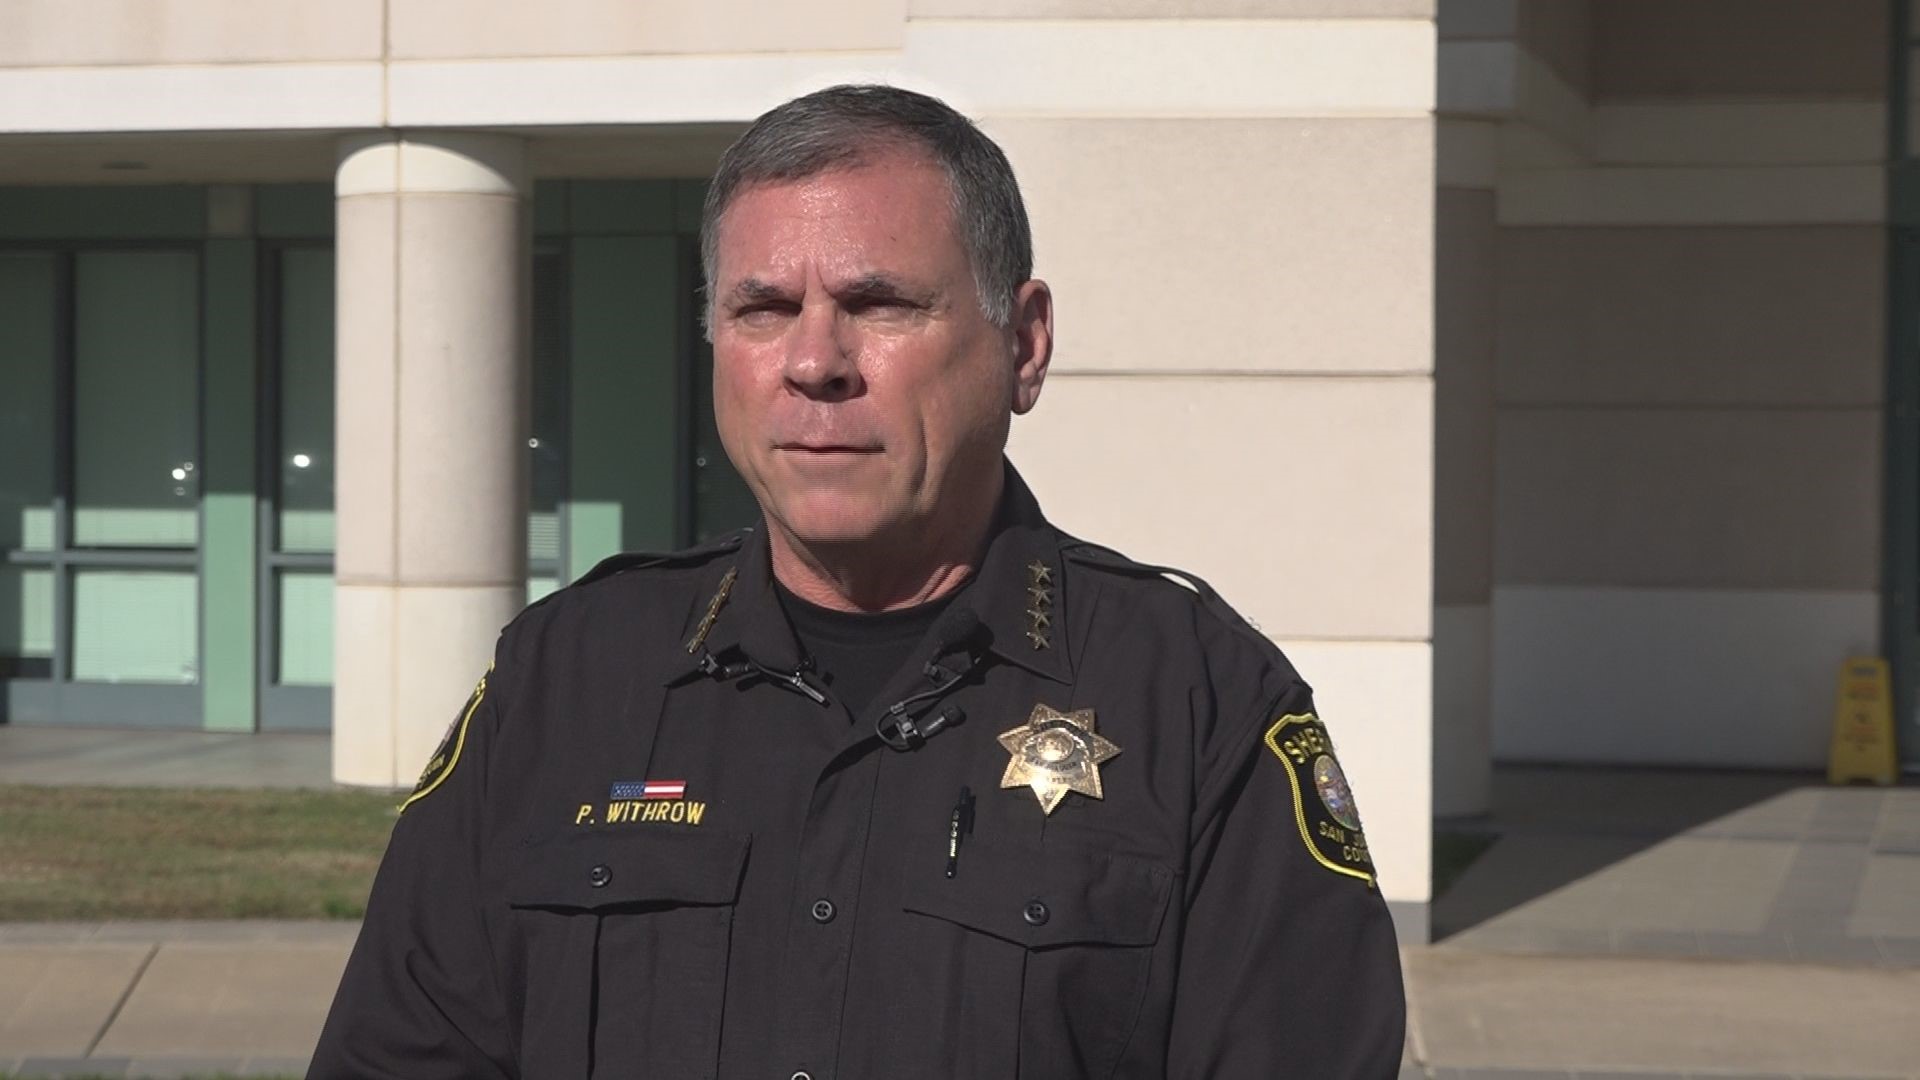 San Joaquin County Sheriff Pat Withrow spoke out about the deadly deputy-involved crash on I-5 that led to the death of an infant over the weekend.